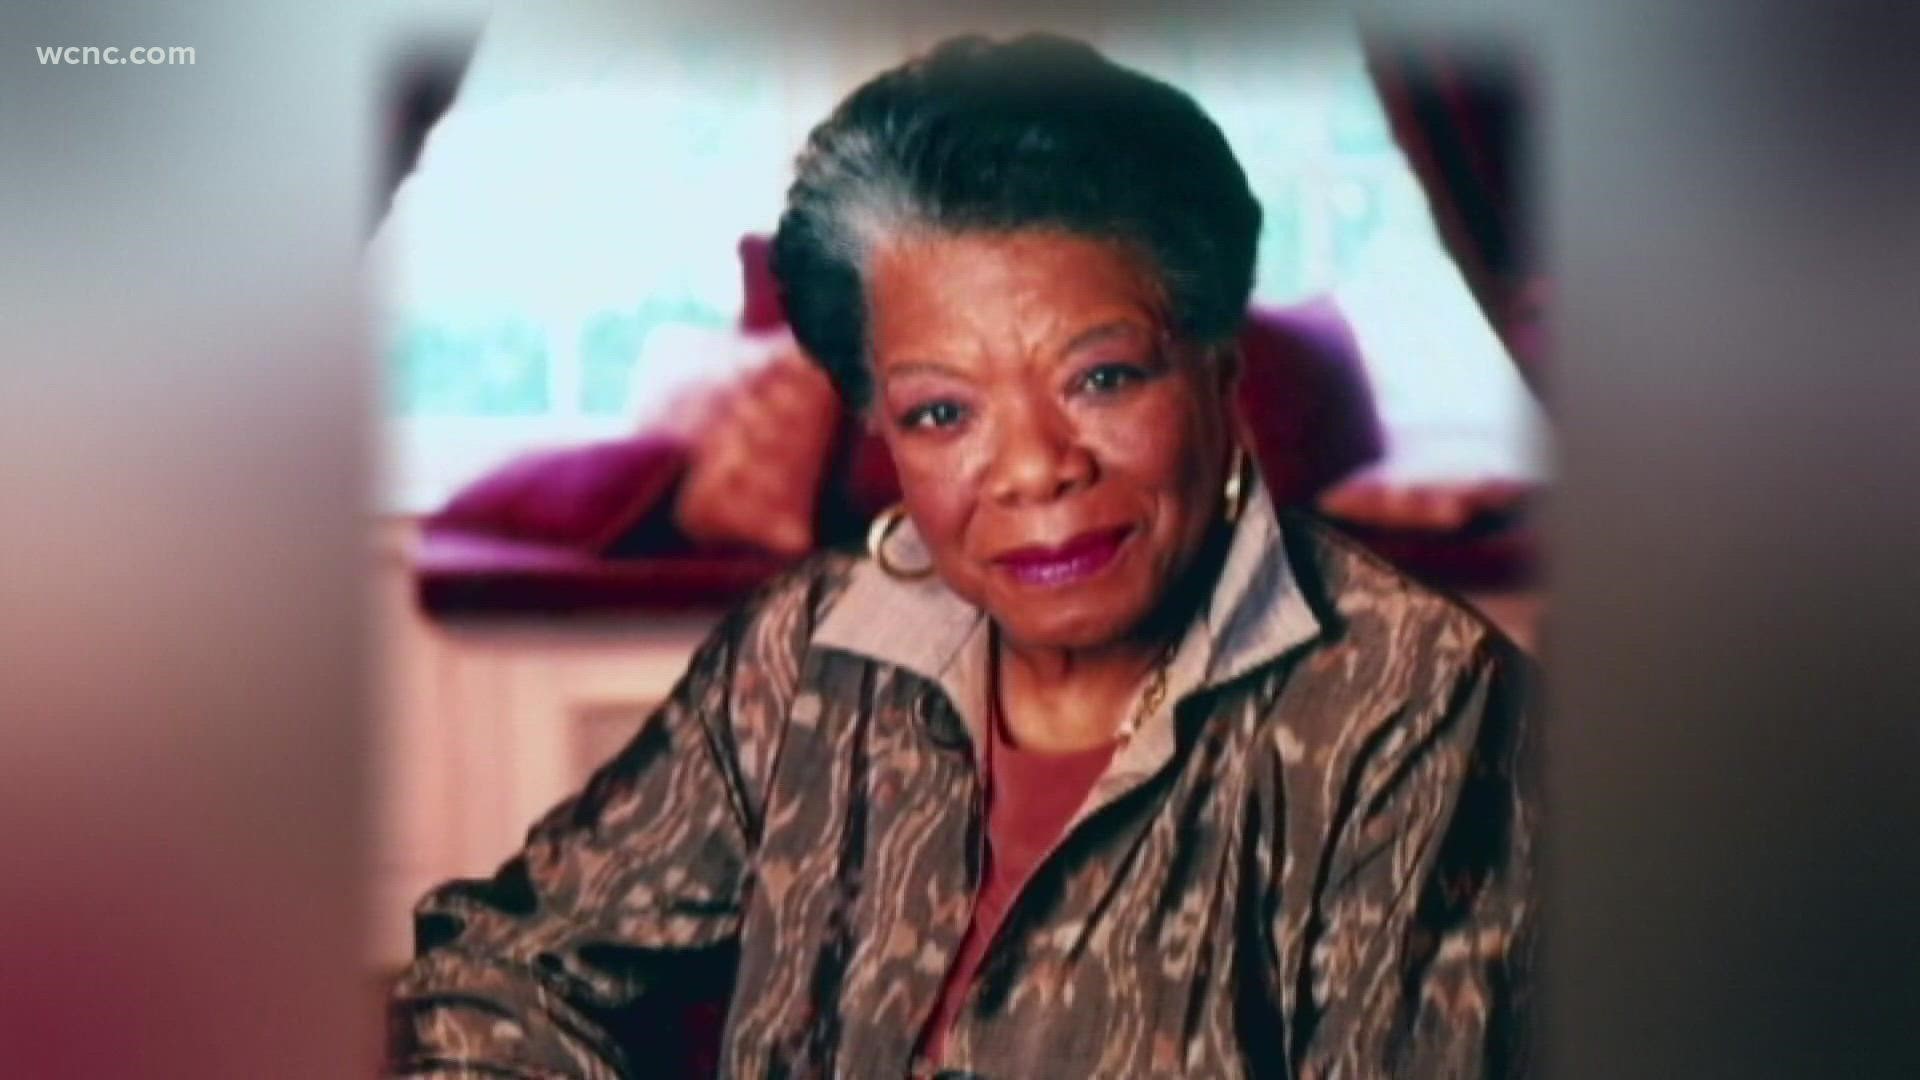 The virtual event will feature an awards presentation and a heartwarming tribute to Dr. Maya Angelou.